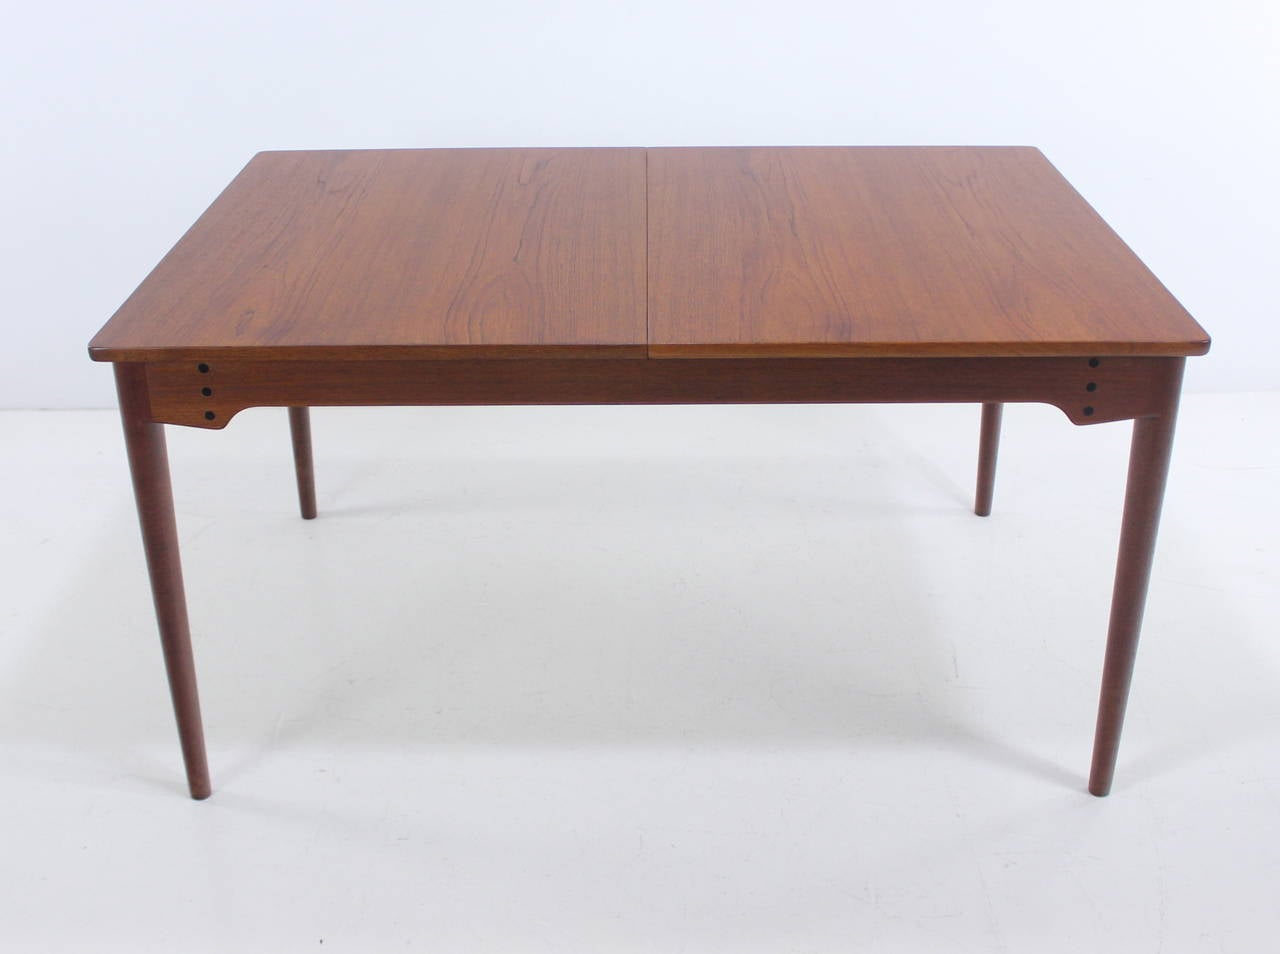 Rare Danish Modern Dining Table with Two Leaves Designed by Finn Juhl In Excellent Condition For Sale In Portland, OR